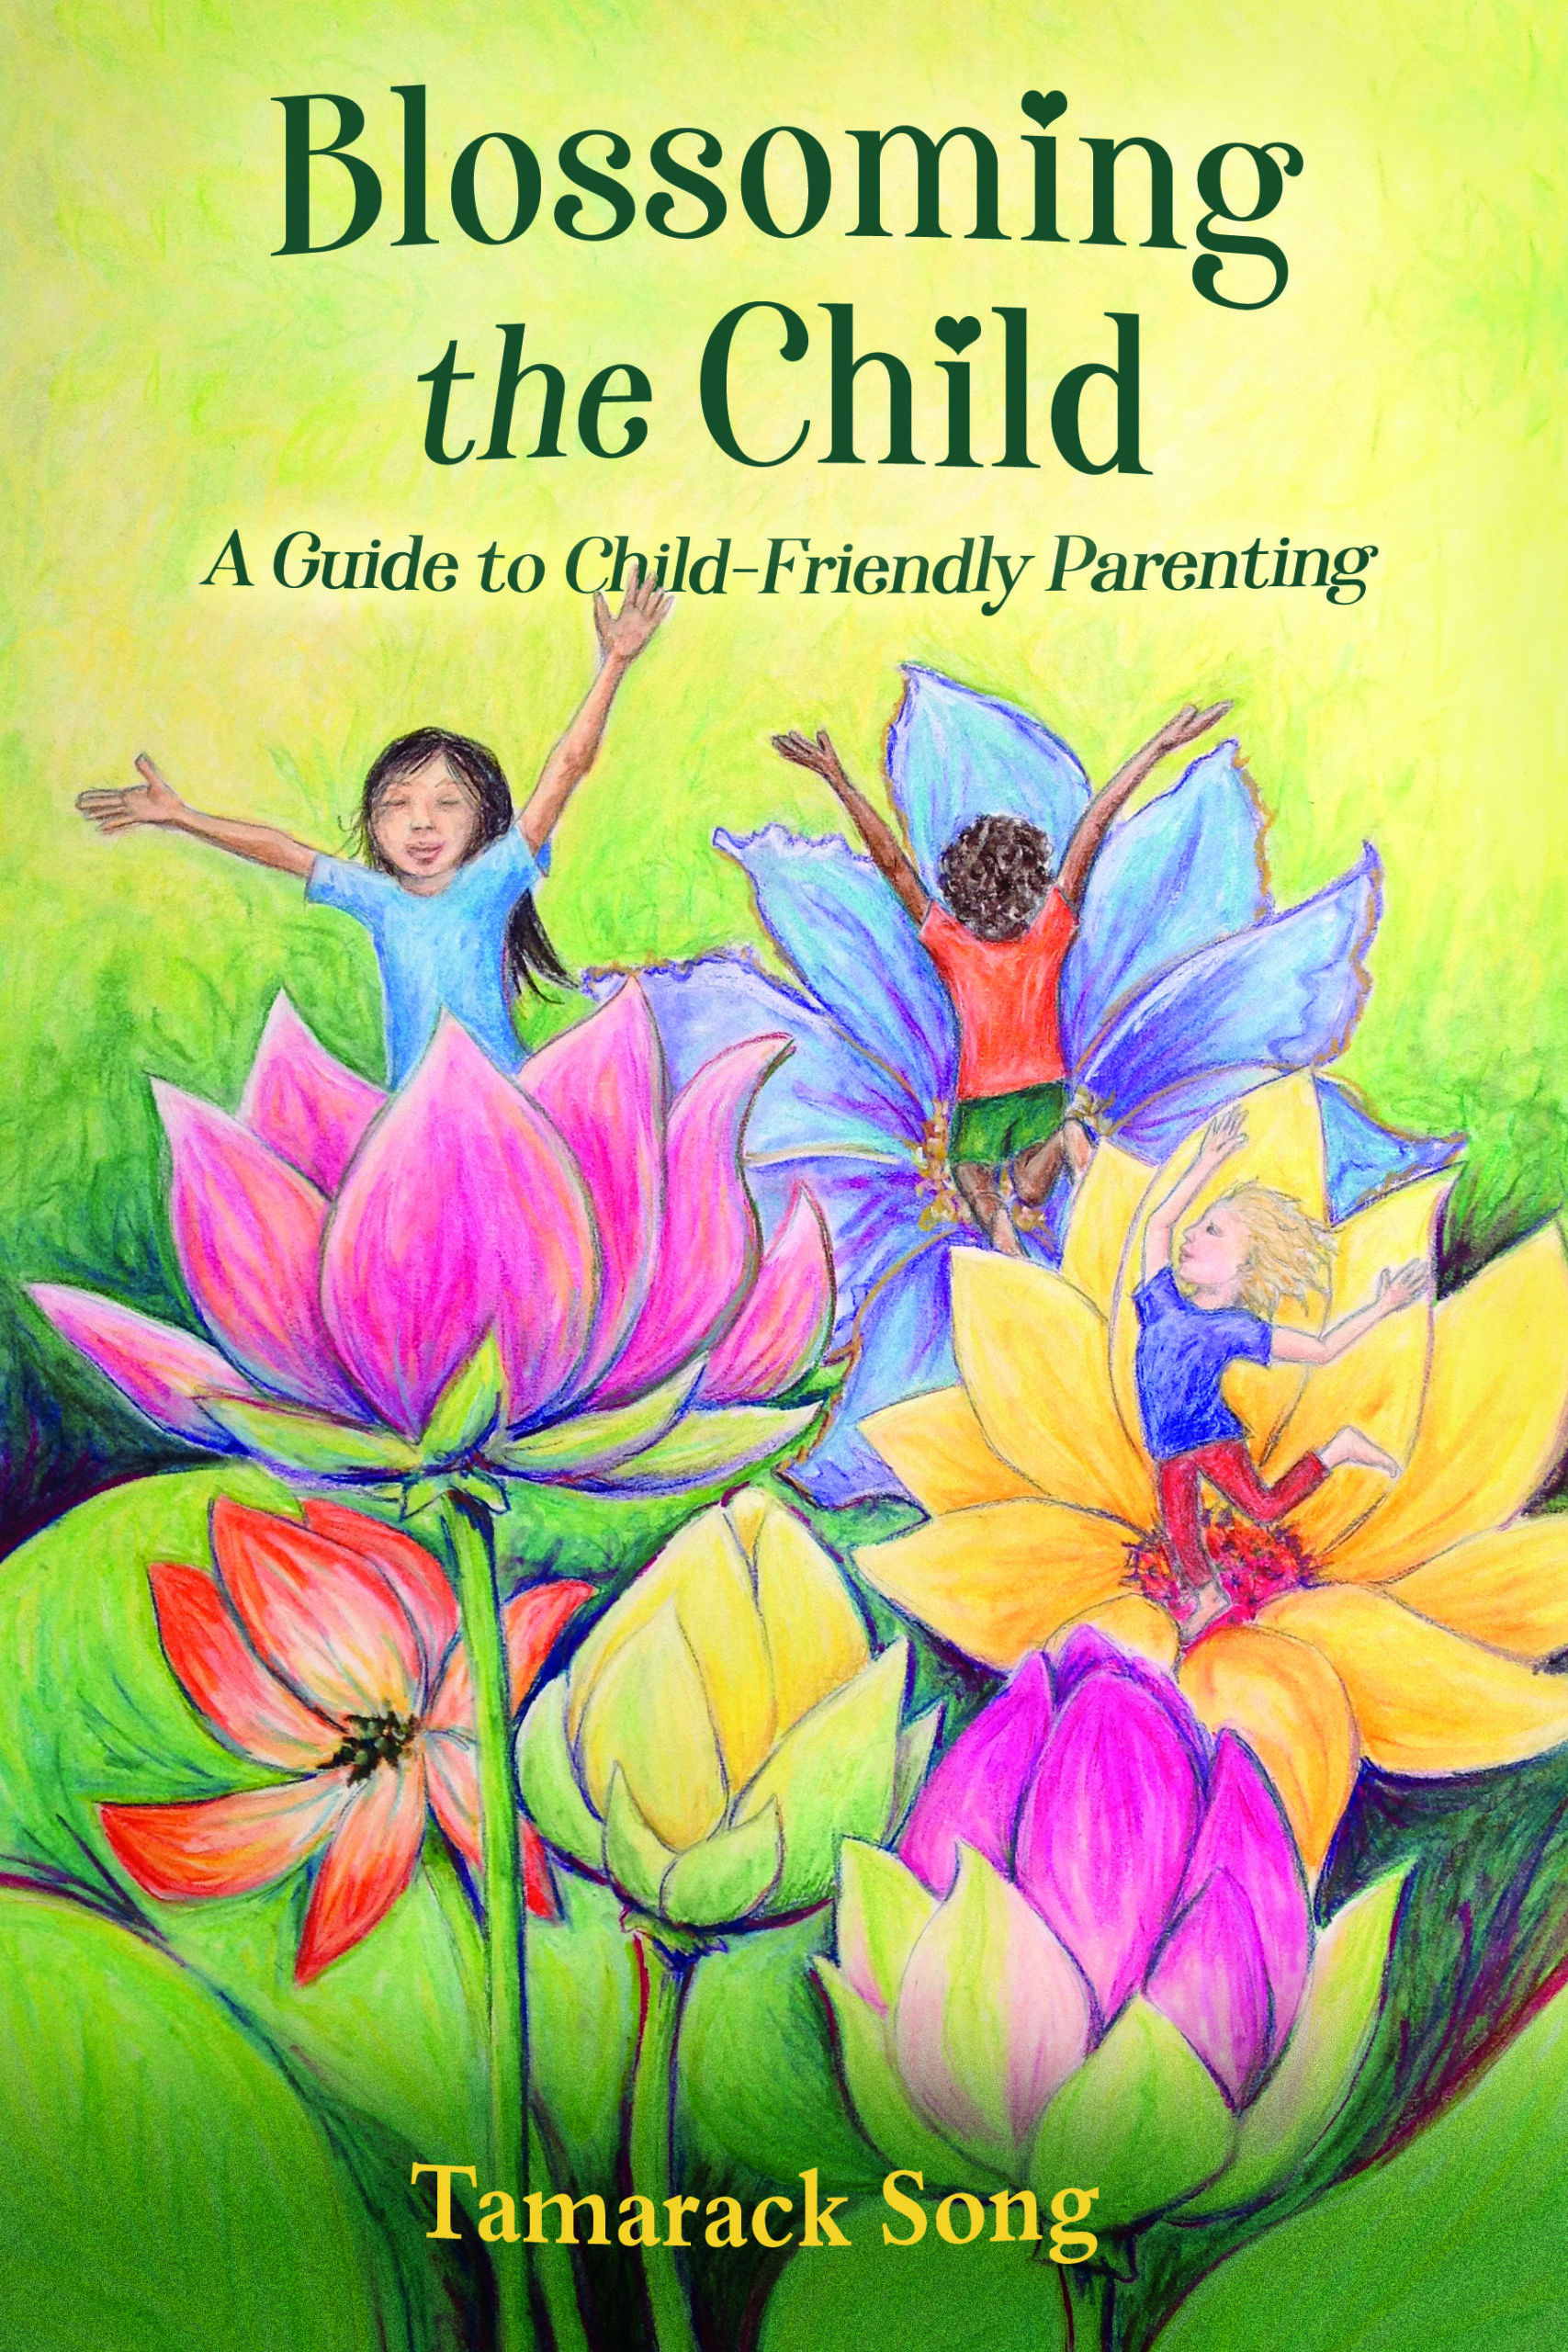 Blossoming the Child: A Guide to Primal Parenting